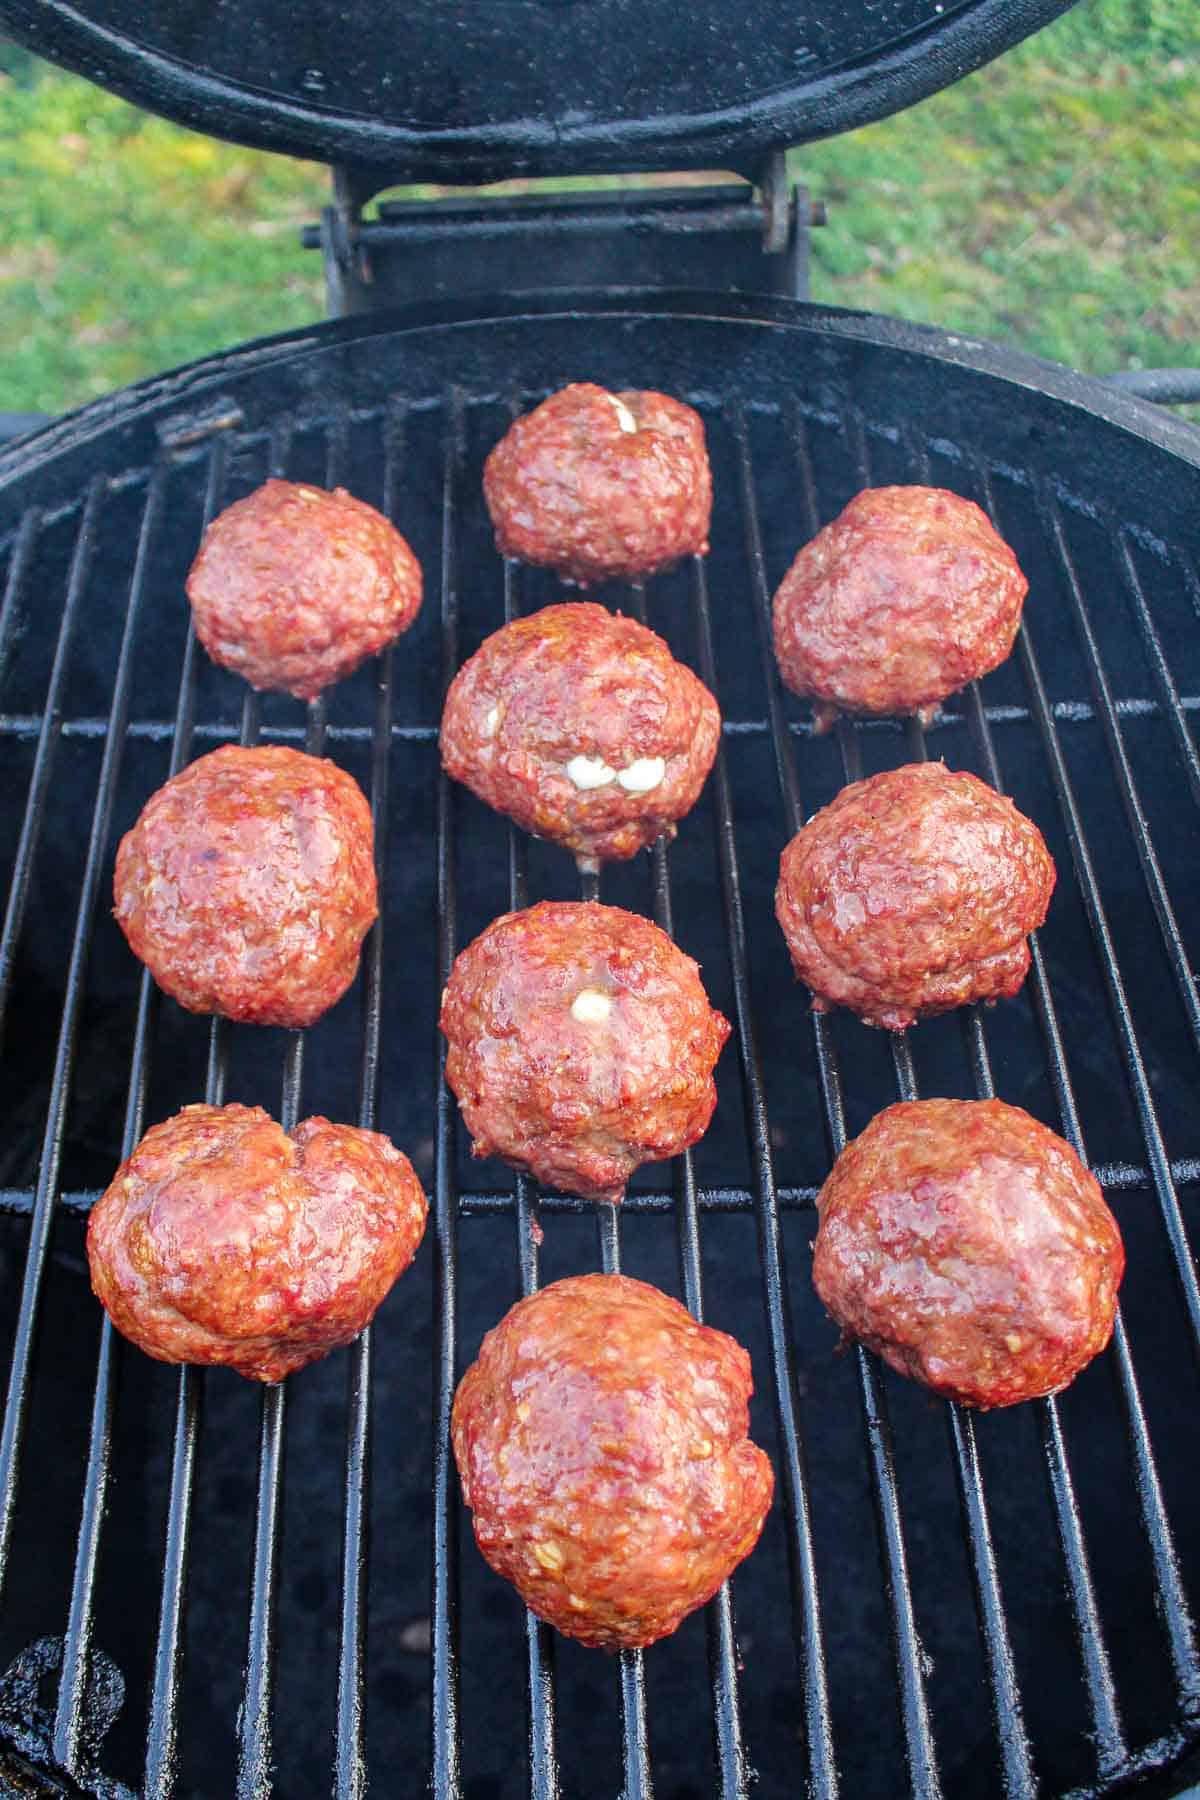 The smoked meatballs finishing up their cook.